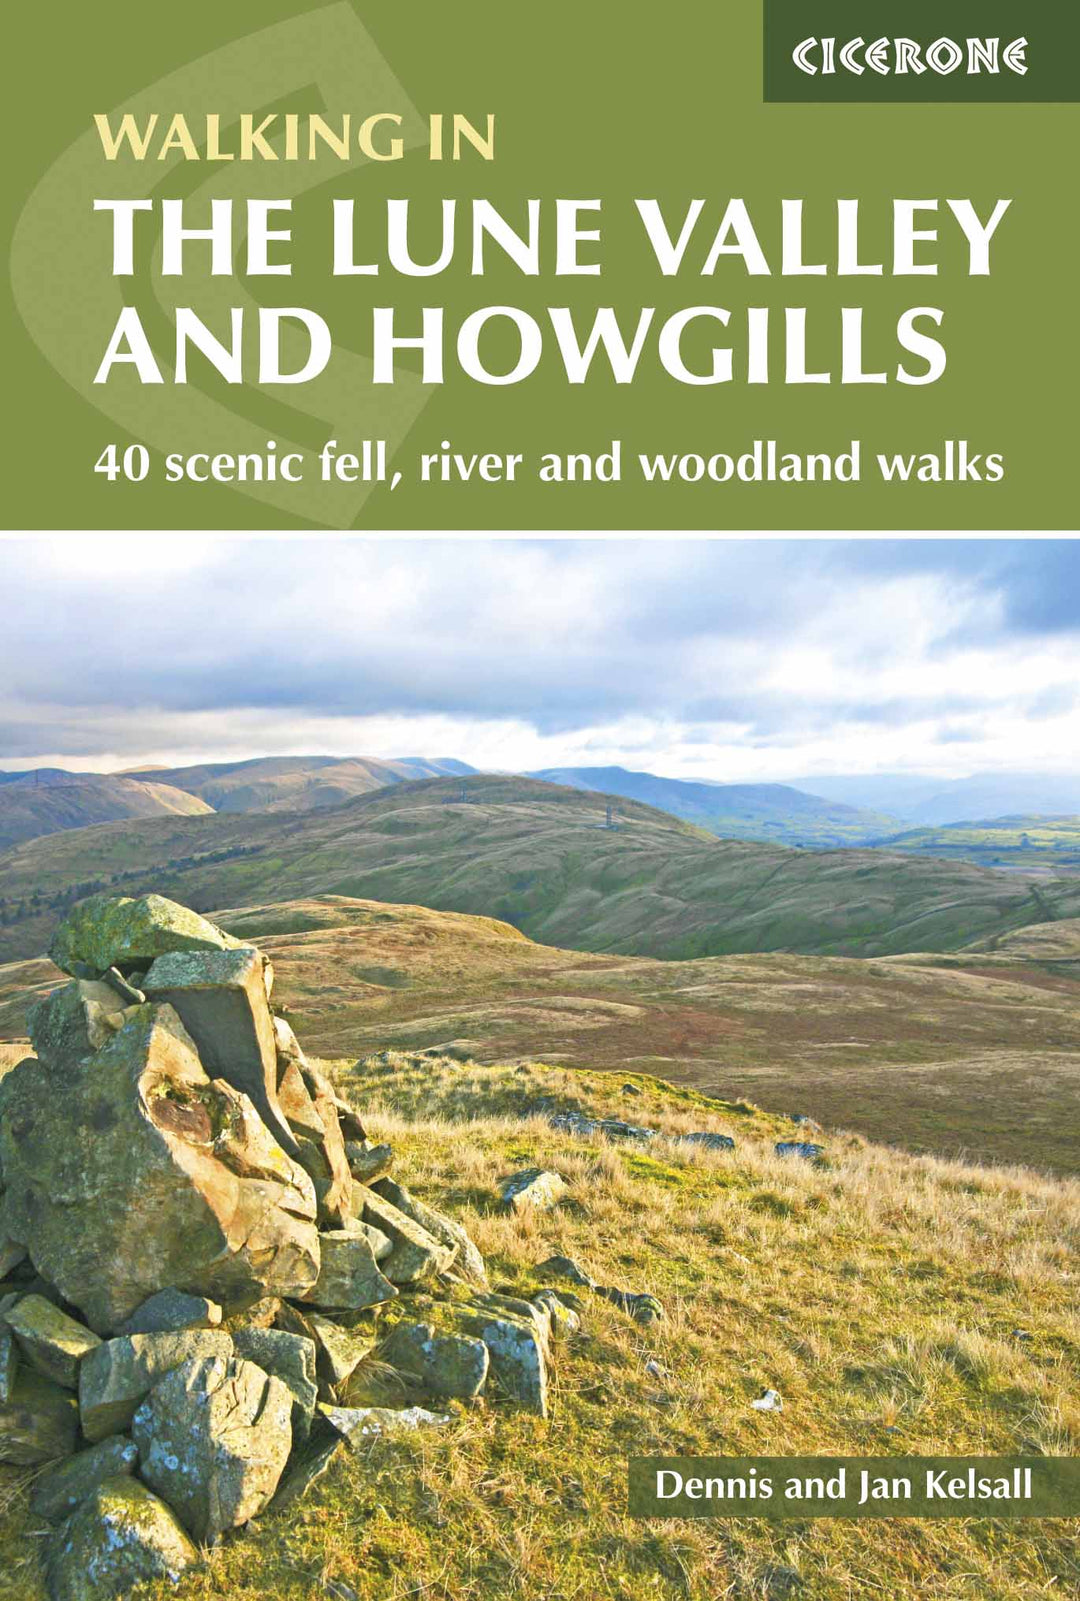 Guide de randonnées (en anglais) - The Lune Valley and Howgills: 40 scenic fell, river and woodland walks | Cicerone guide de randonnée Cicerone 